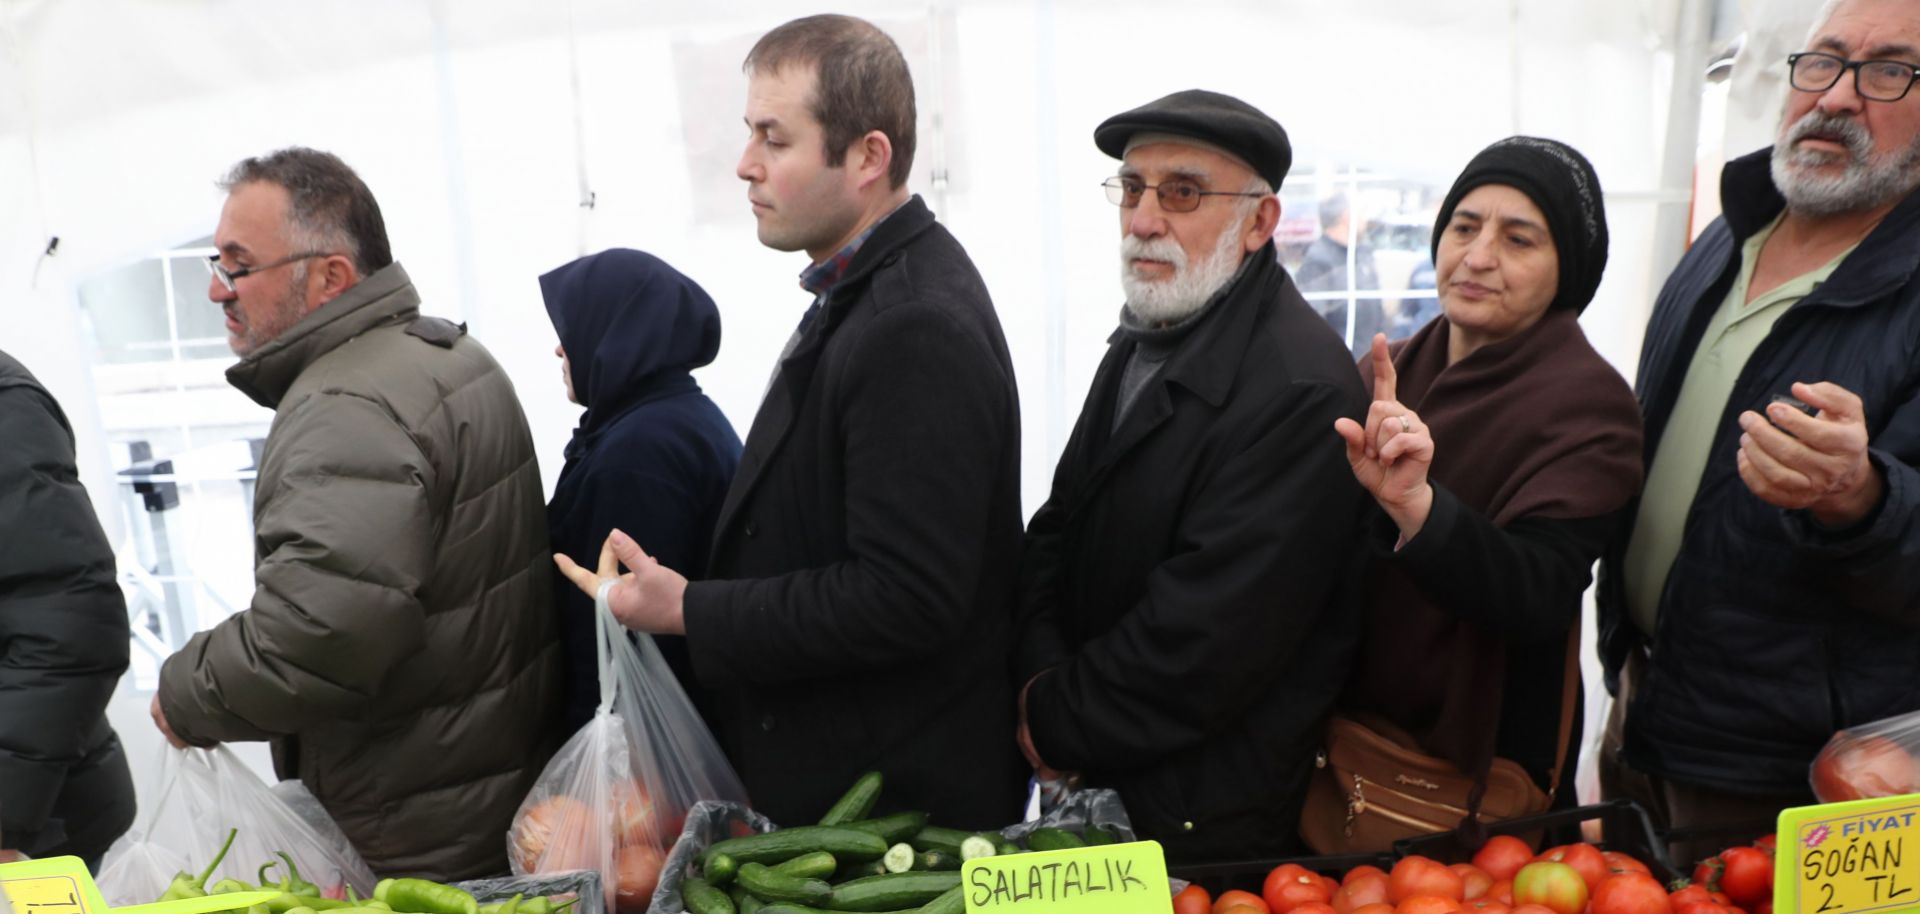 People line up to buy discounted vegetables sold by municipal authorities in Ankara, Turkey, on Feb. 13, 2019.